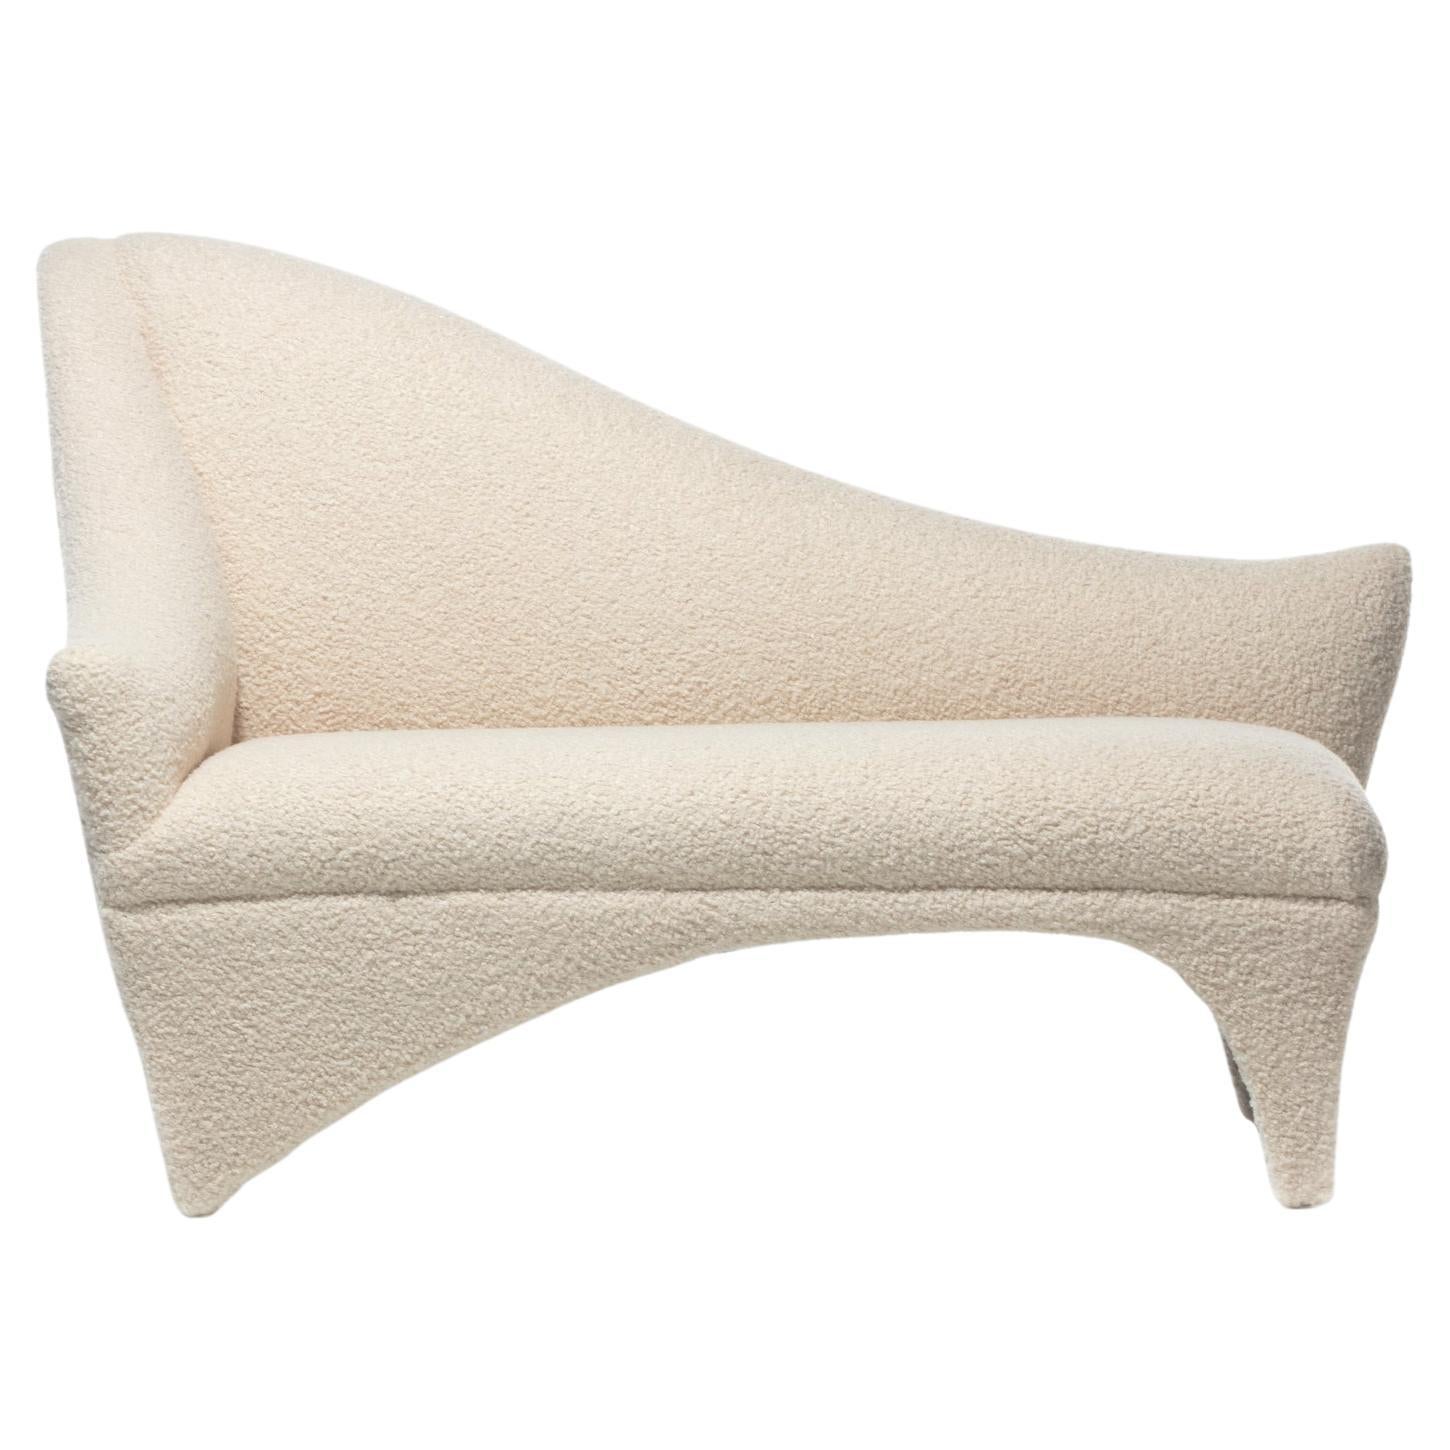 Vladimir Kagan A-Symmetric Settee in Ivory Bouclé by Directional, c. 1991 For Sale 14